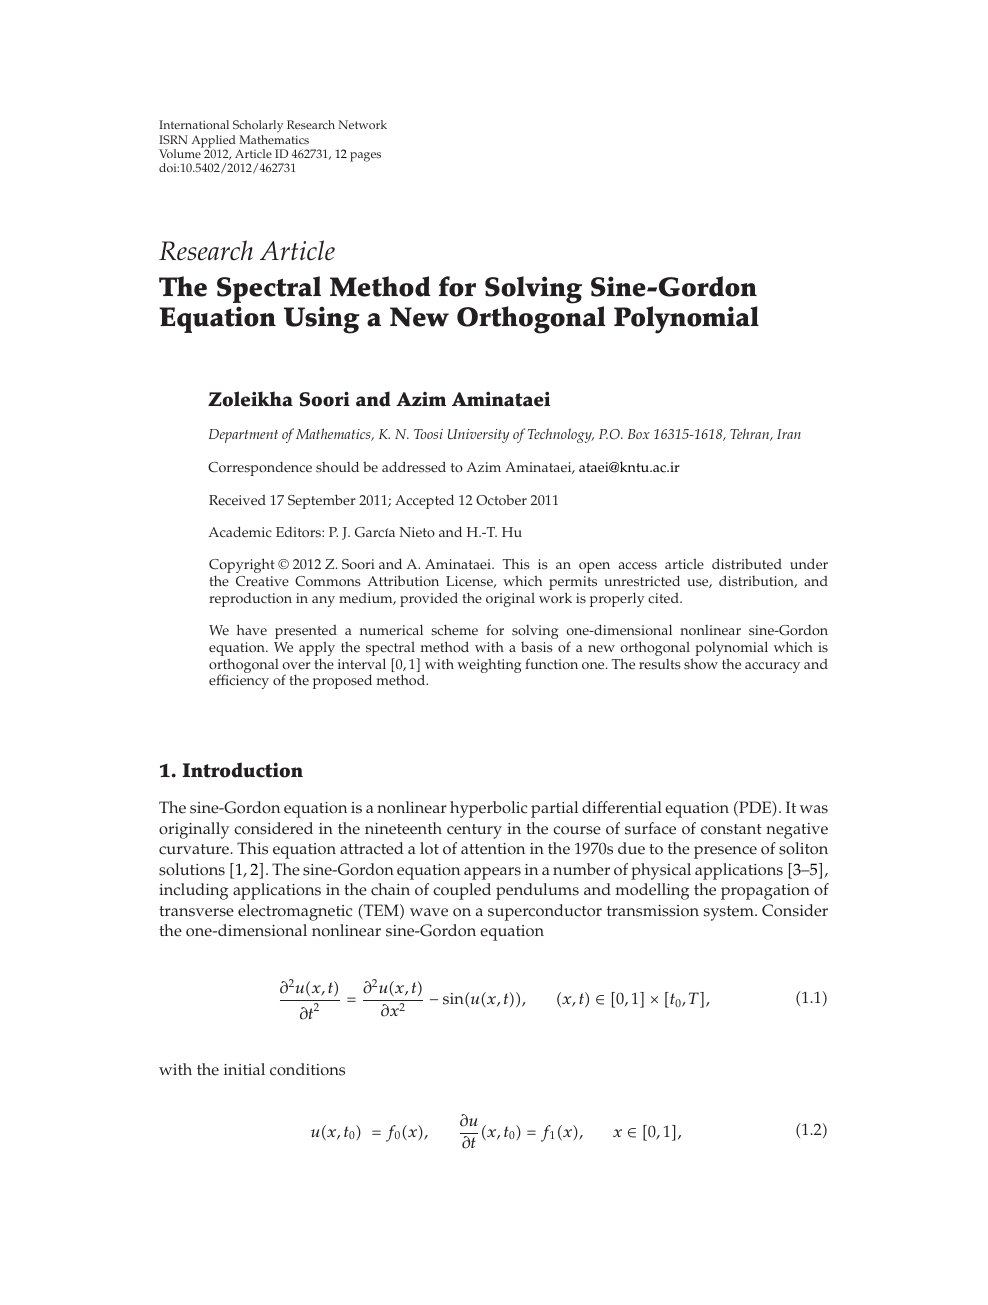 The Spectral Method For Solving Sine Gordon Equation Using A New Orthogonal Polynomial Topic Of Research Paper In Mathematics Download Scholarly Article Pdf And Read For Free On Cyberleninka Open Science Hub